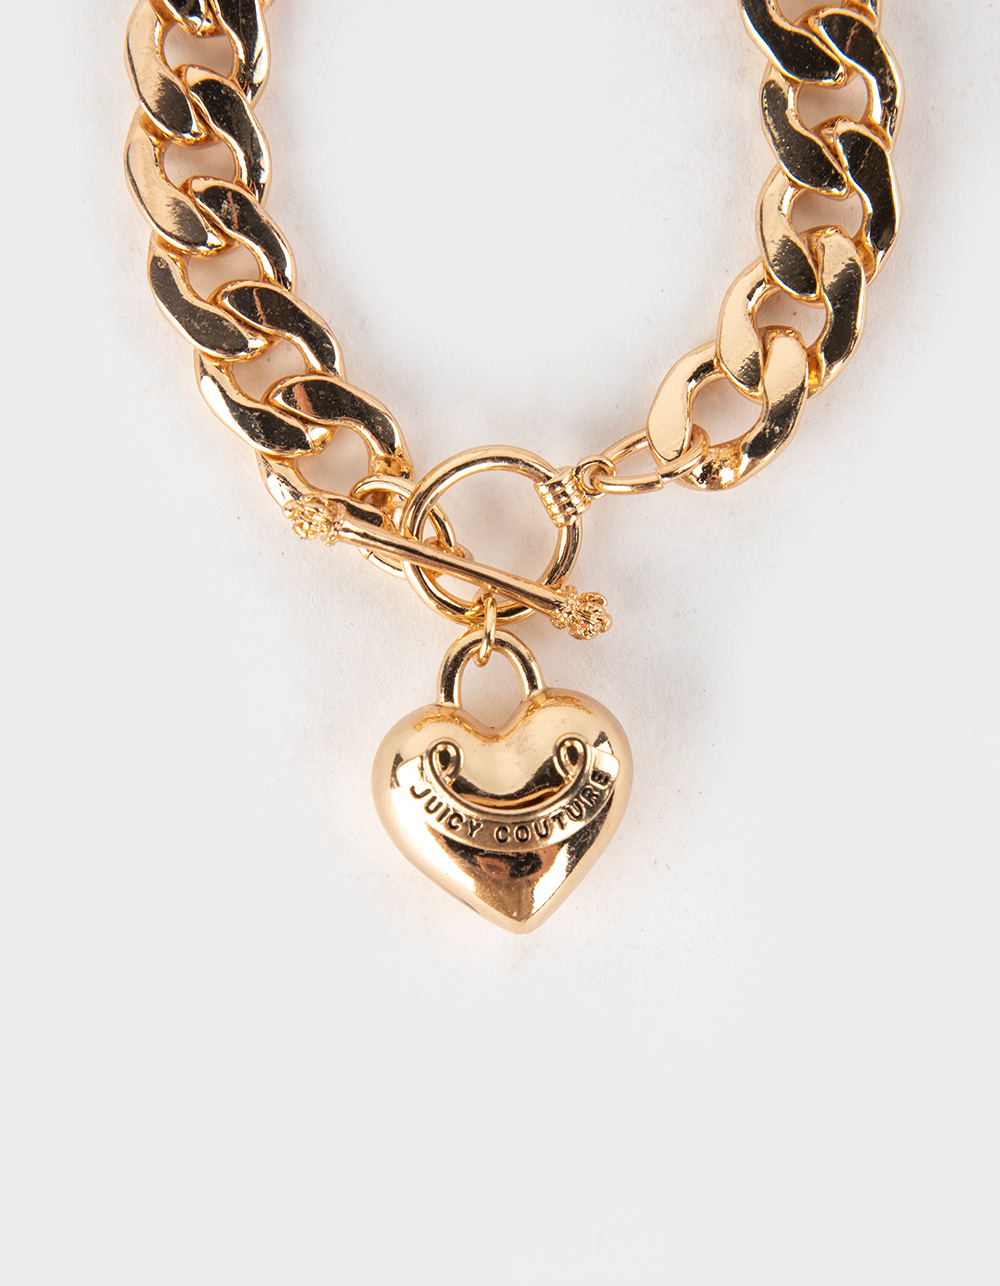 Juicy Couture Charm Bracelet Gold - $48 New With Tags - From